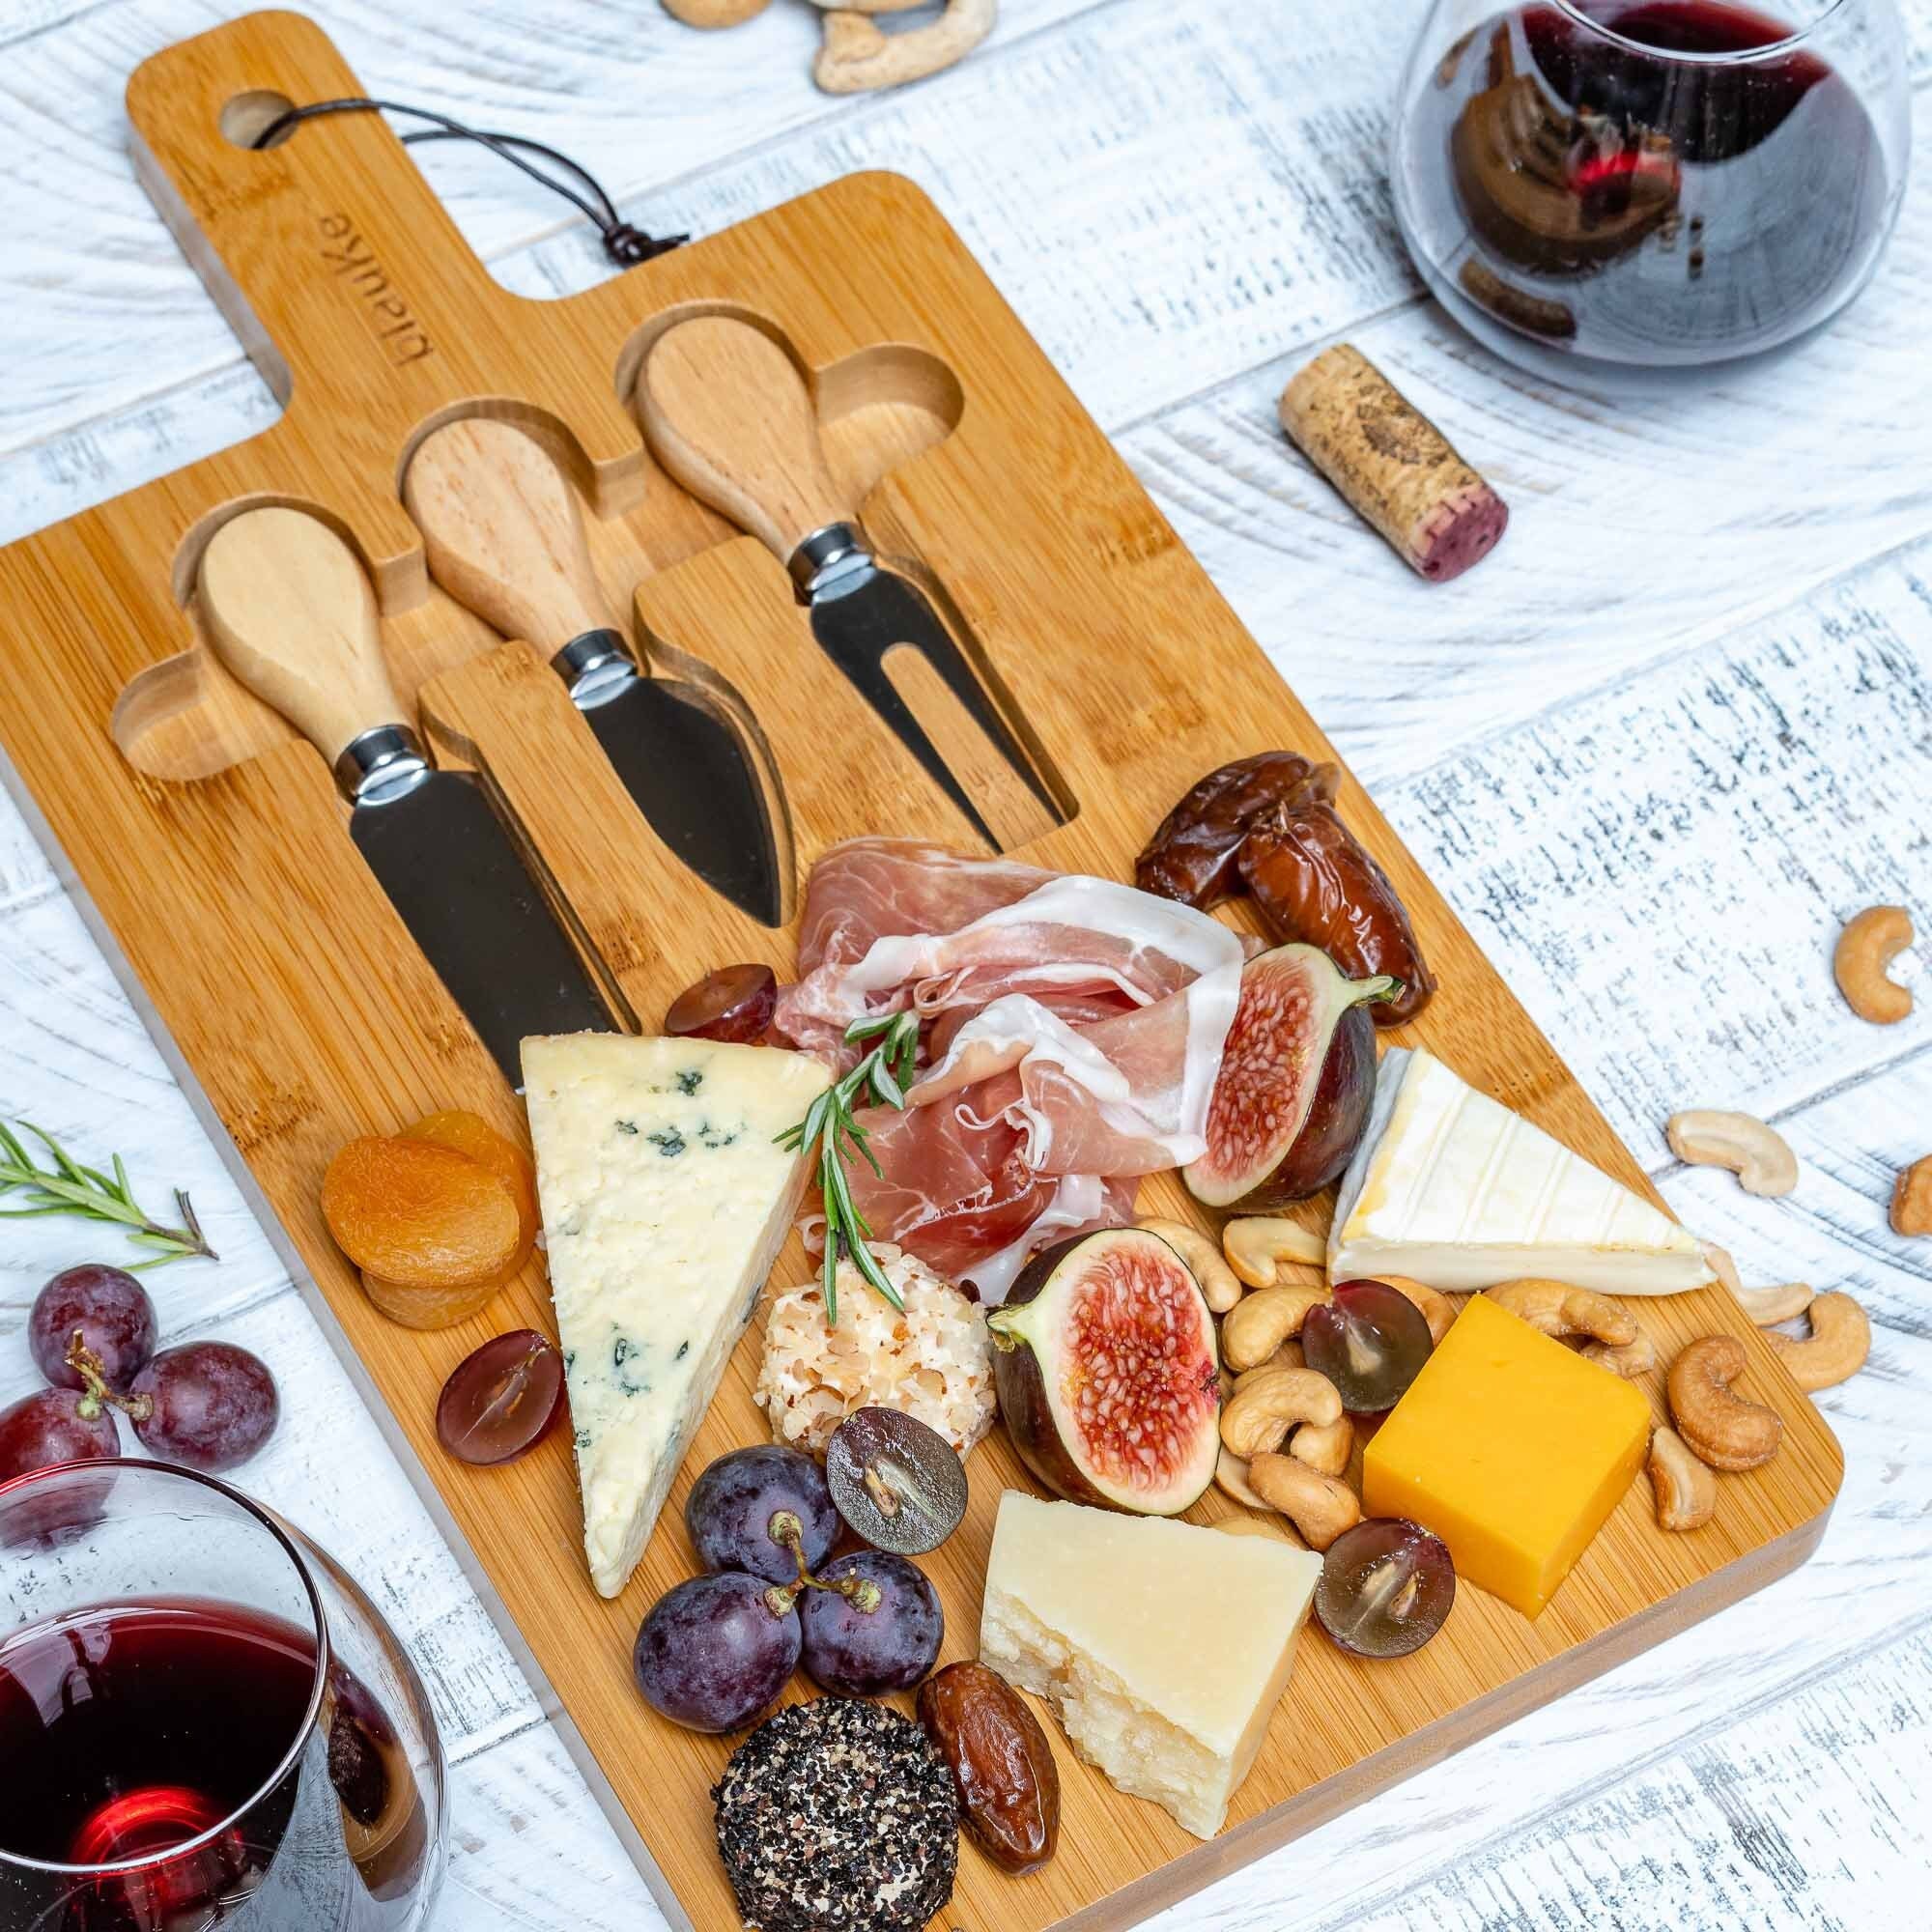 Trieste Large Personalized Cheese Board Set with Cheese Knives - Marble and Wood - Home Wet Bar